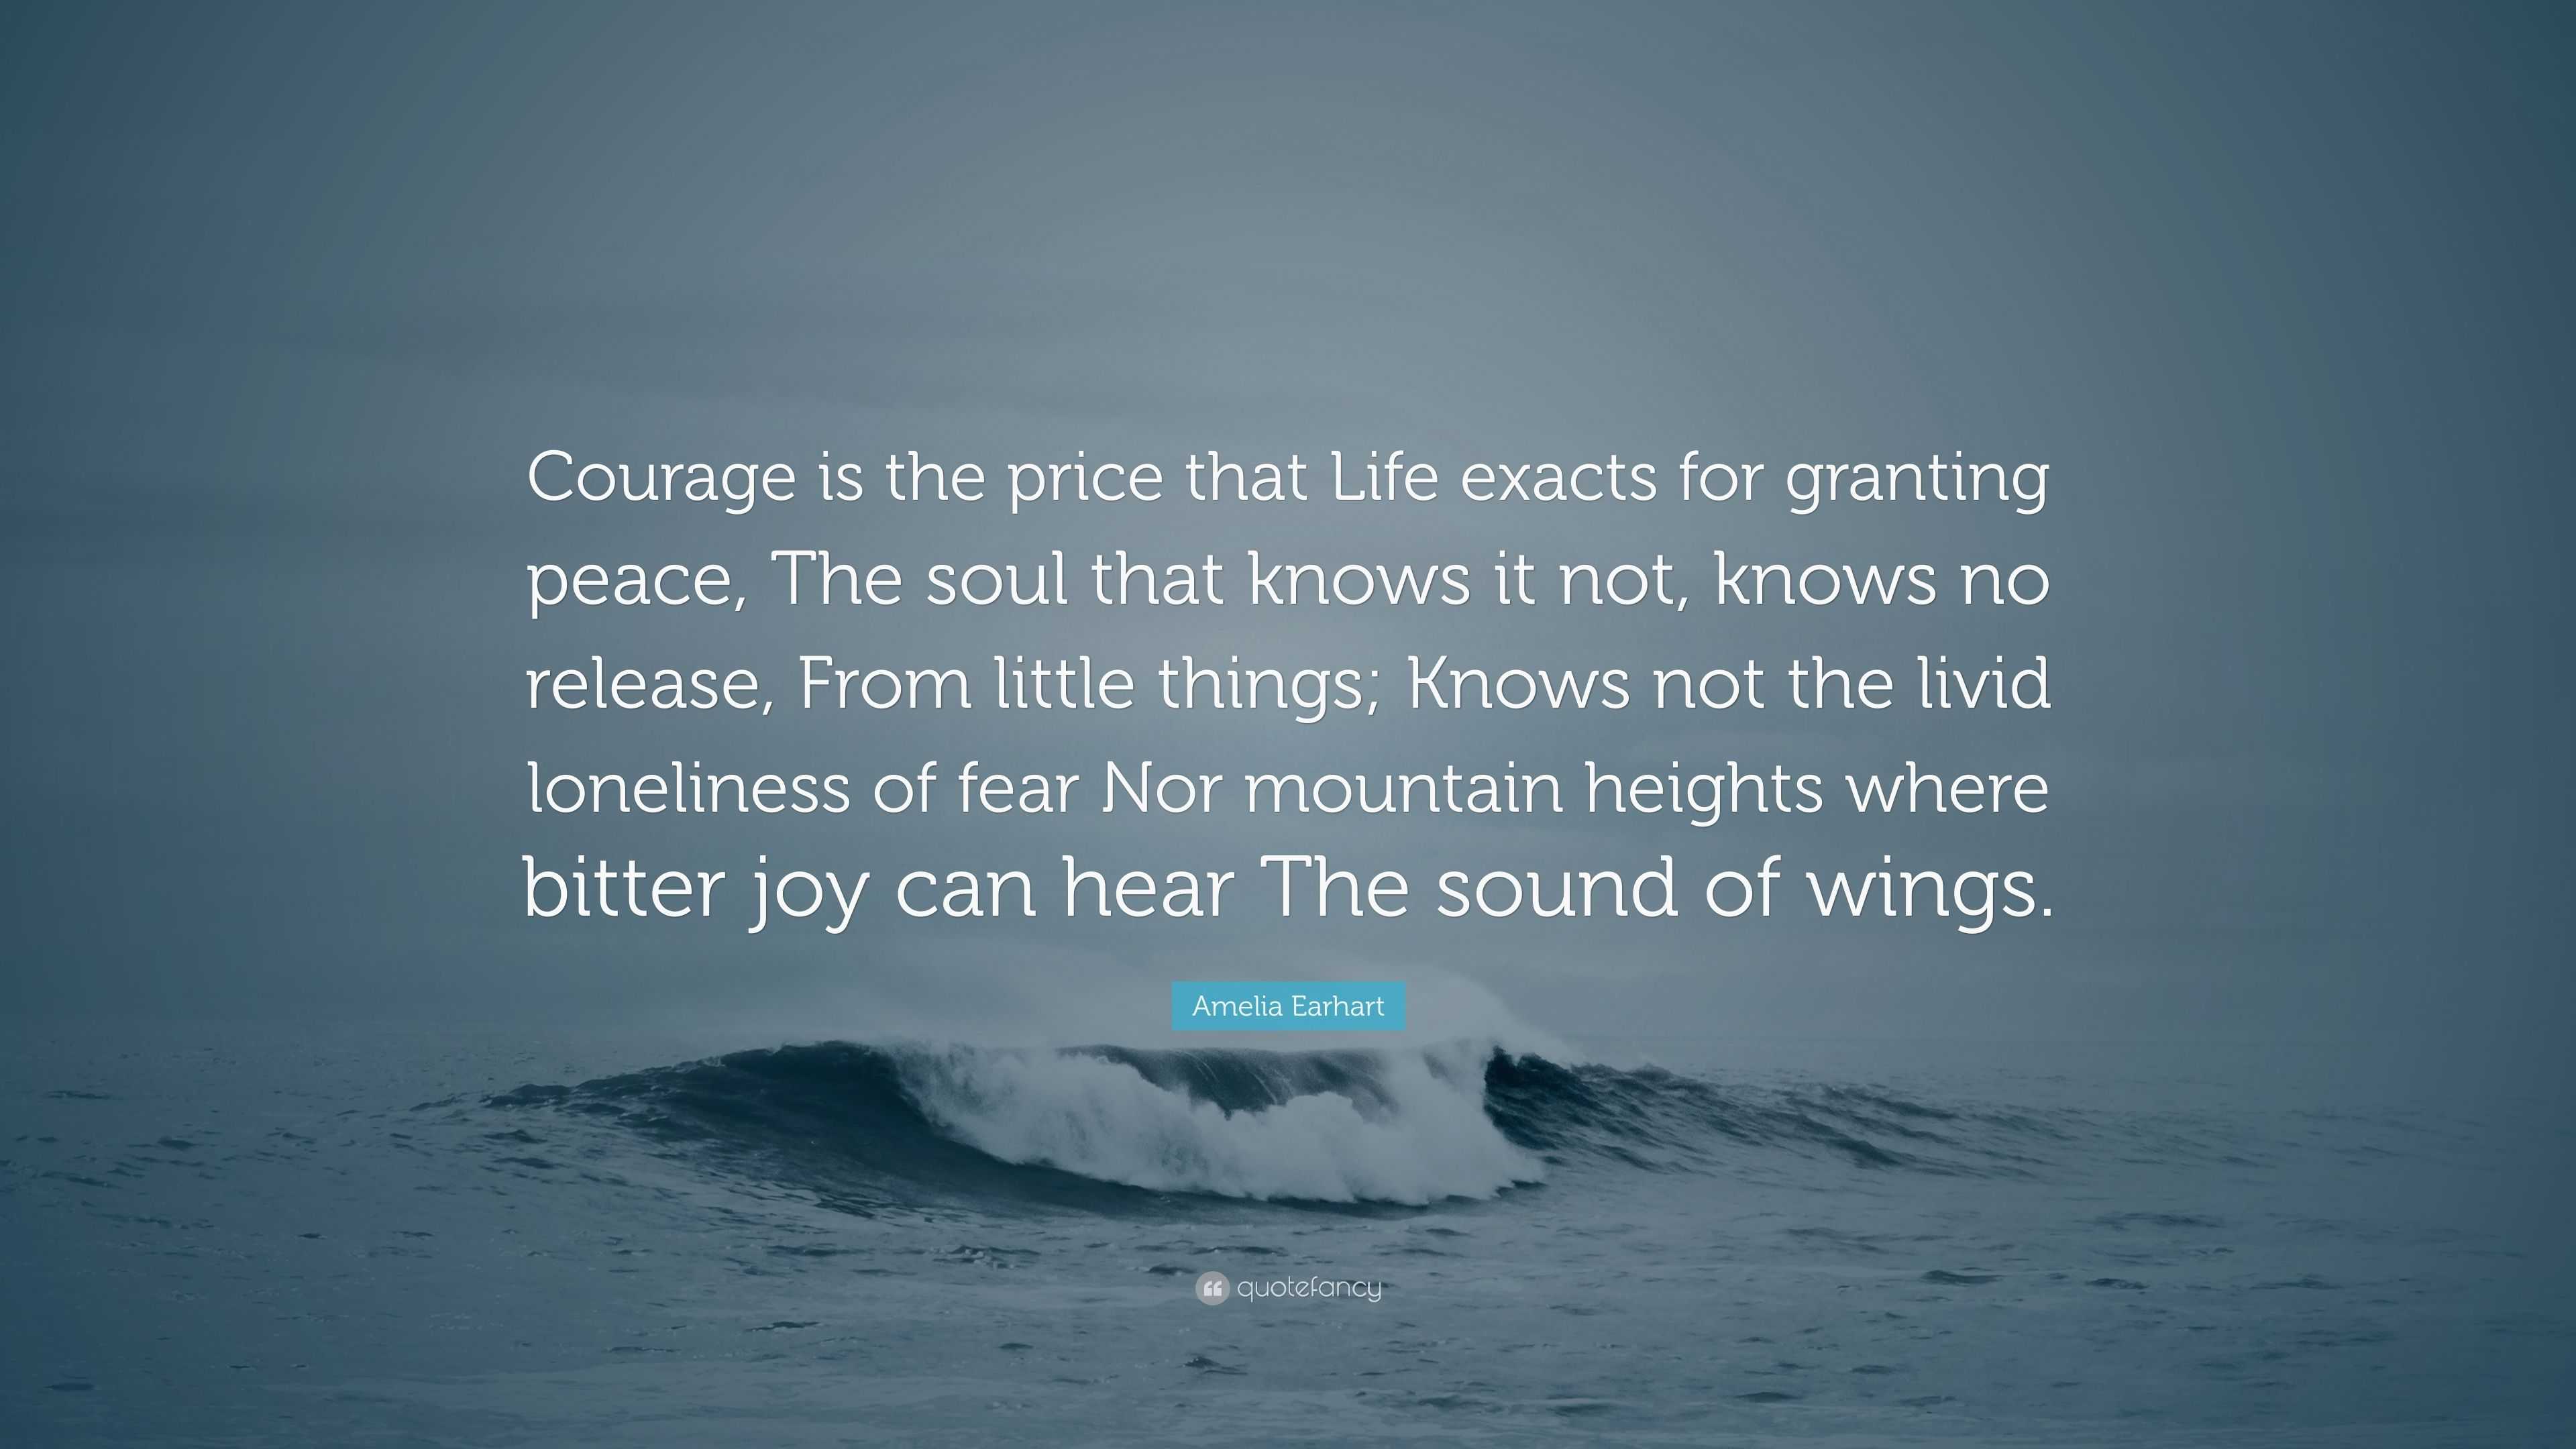 Amelia Earhart Quote: “Courage is the price that Life exacts for